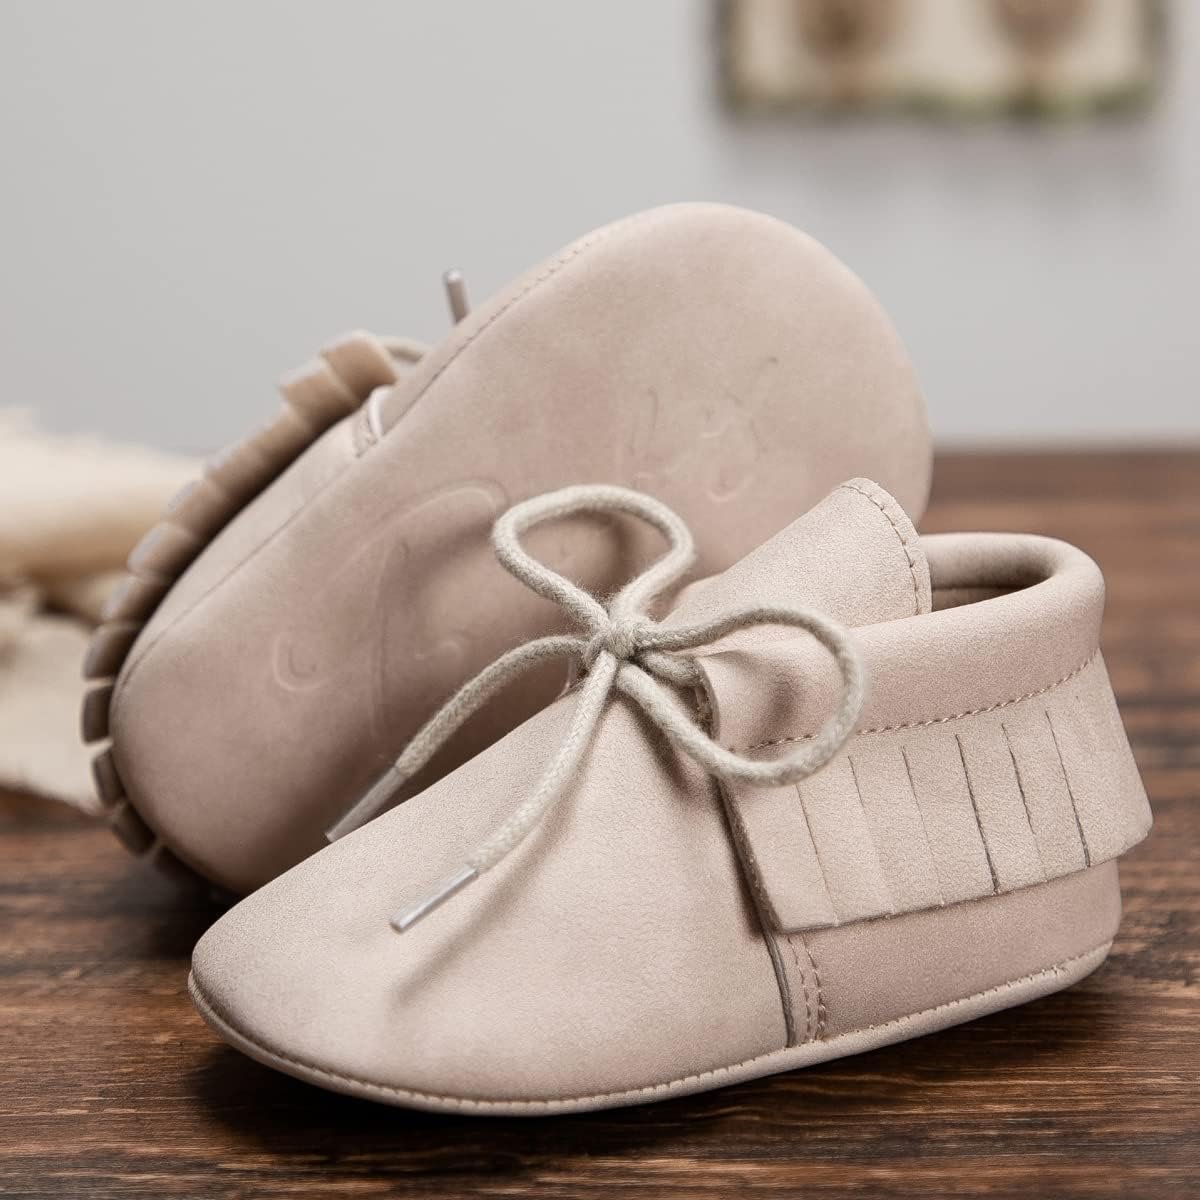 CENCIRILY Infant Baby Fringe Moccasin Slipper Boys Girls Tassel Suede Leather Toddler Sneakers Soft Sole First Walking Loafers Crib Shoes